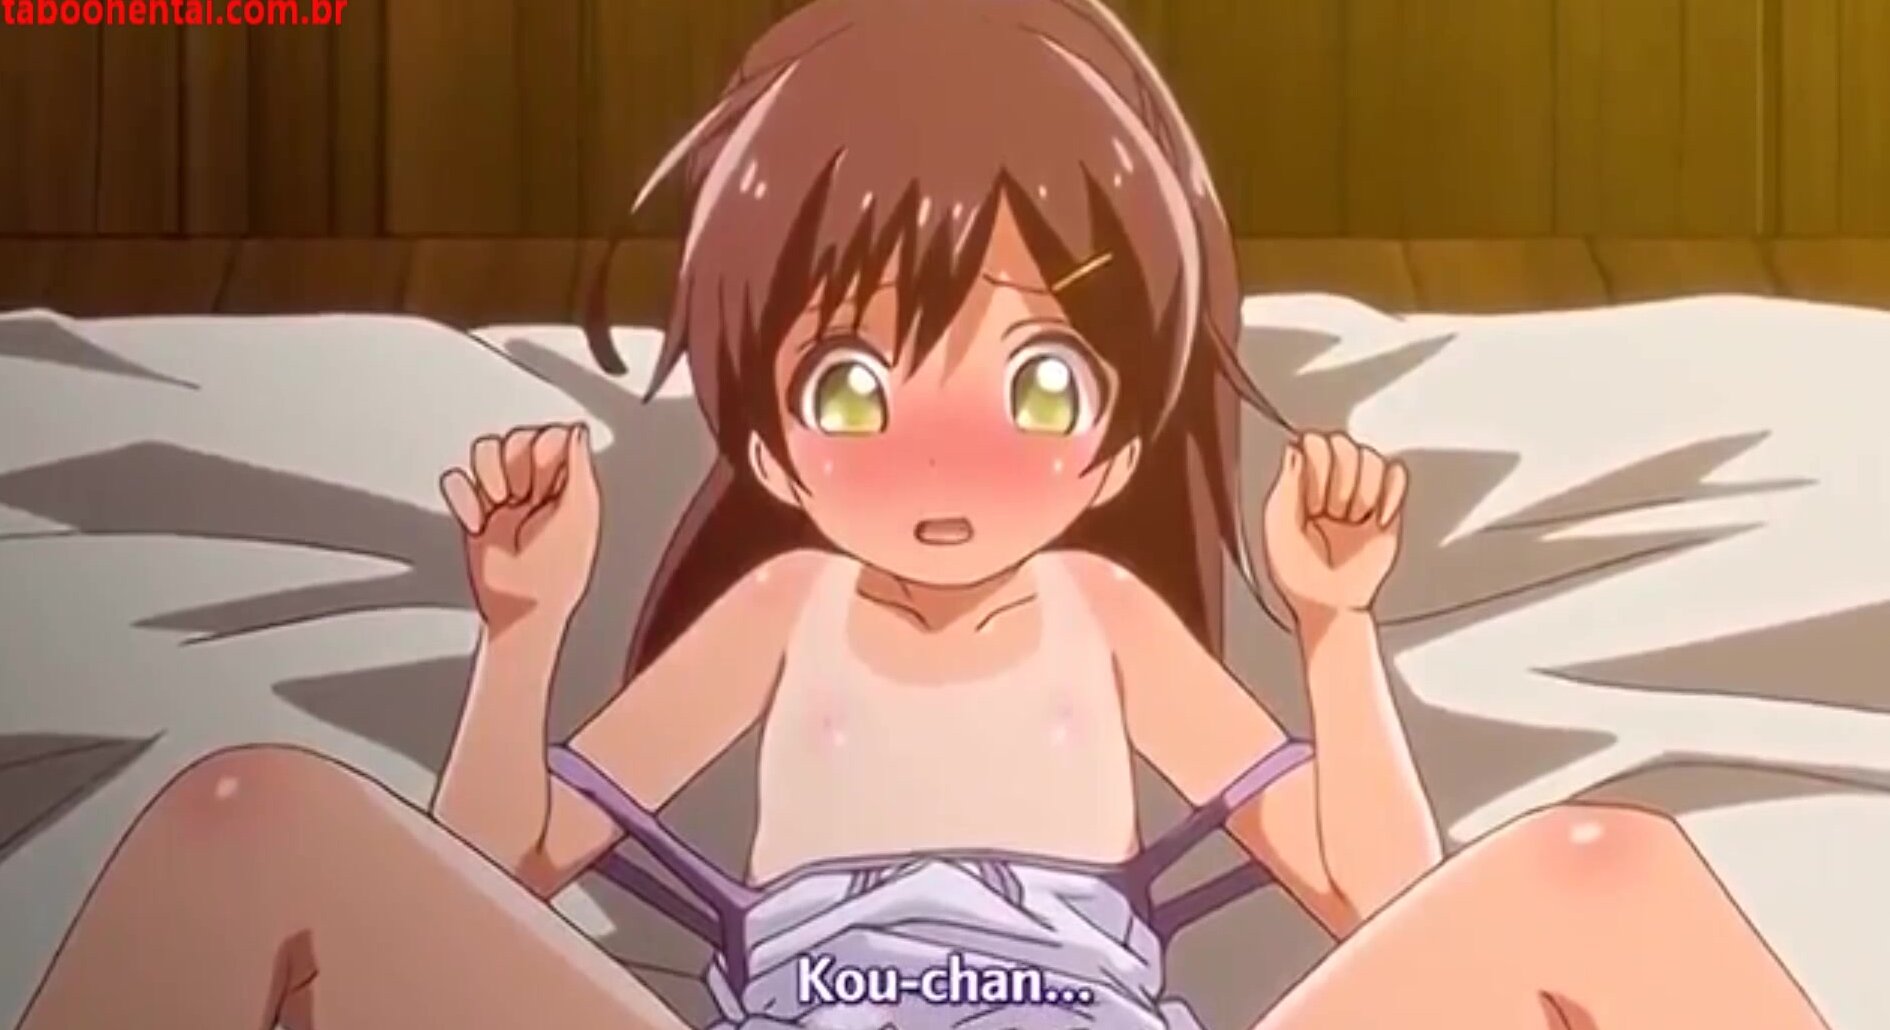 Watch as Br Title Minha Irmã Safadinha gets her small tits fondled in a steamy Japanese hentai image pic